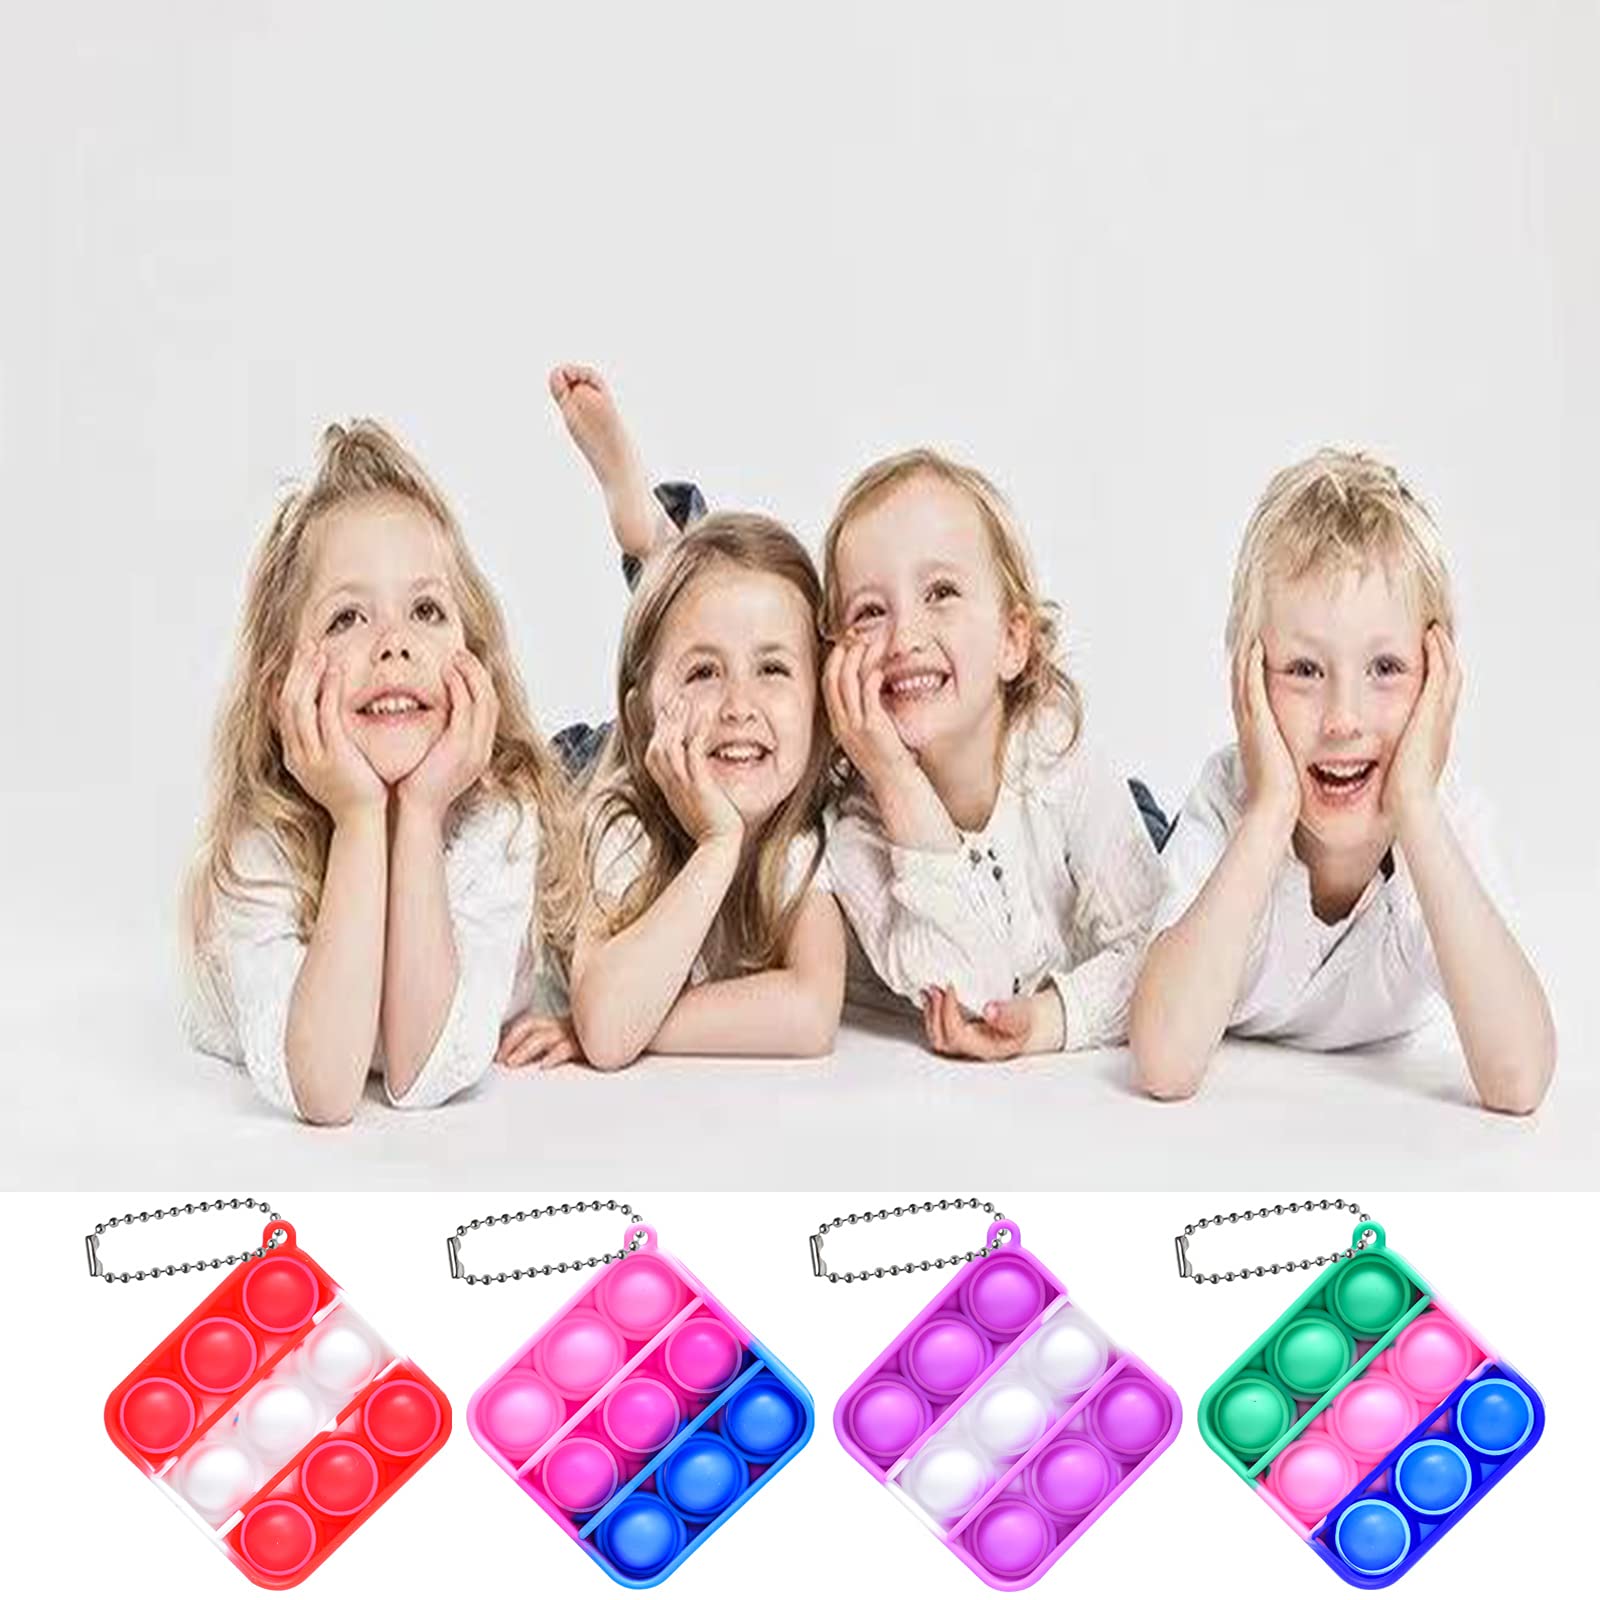 Zxhtwo 16 PCS Mini Pop Fidget Toy Pack Simple Bubble Poping Sensory Keychain Toys, Silicone Squeeze Rainbow Stress Relief Hand Toy, Anti-Anxiety Office Desk Toys for Kids Adults